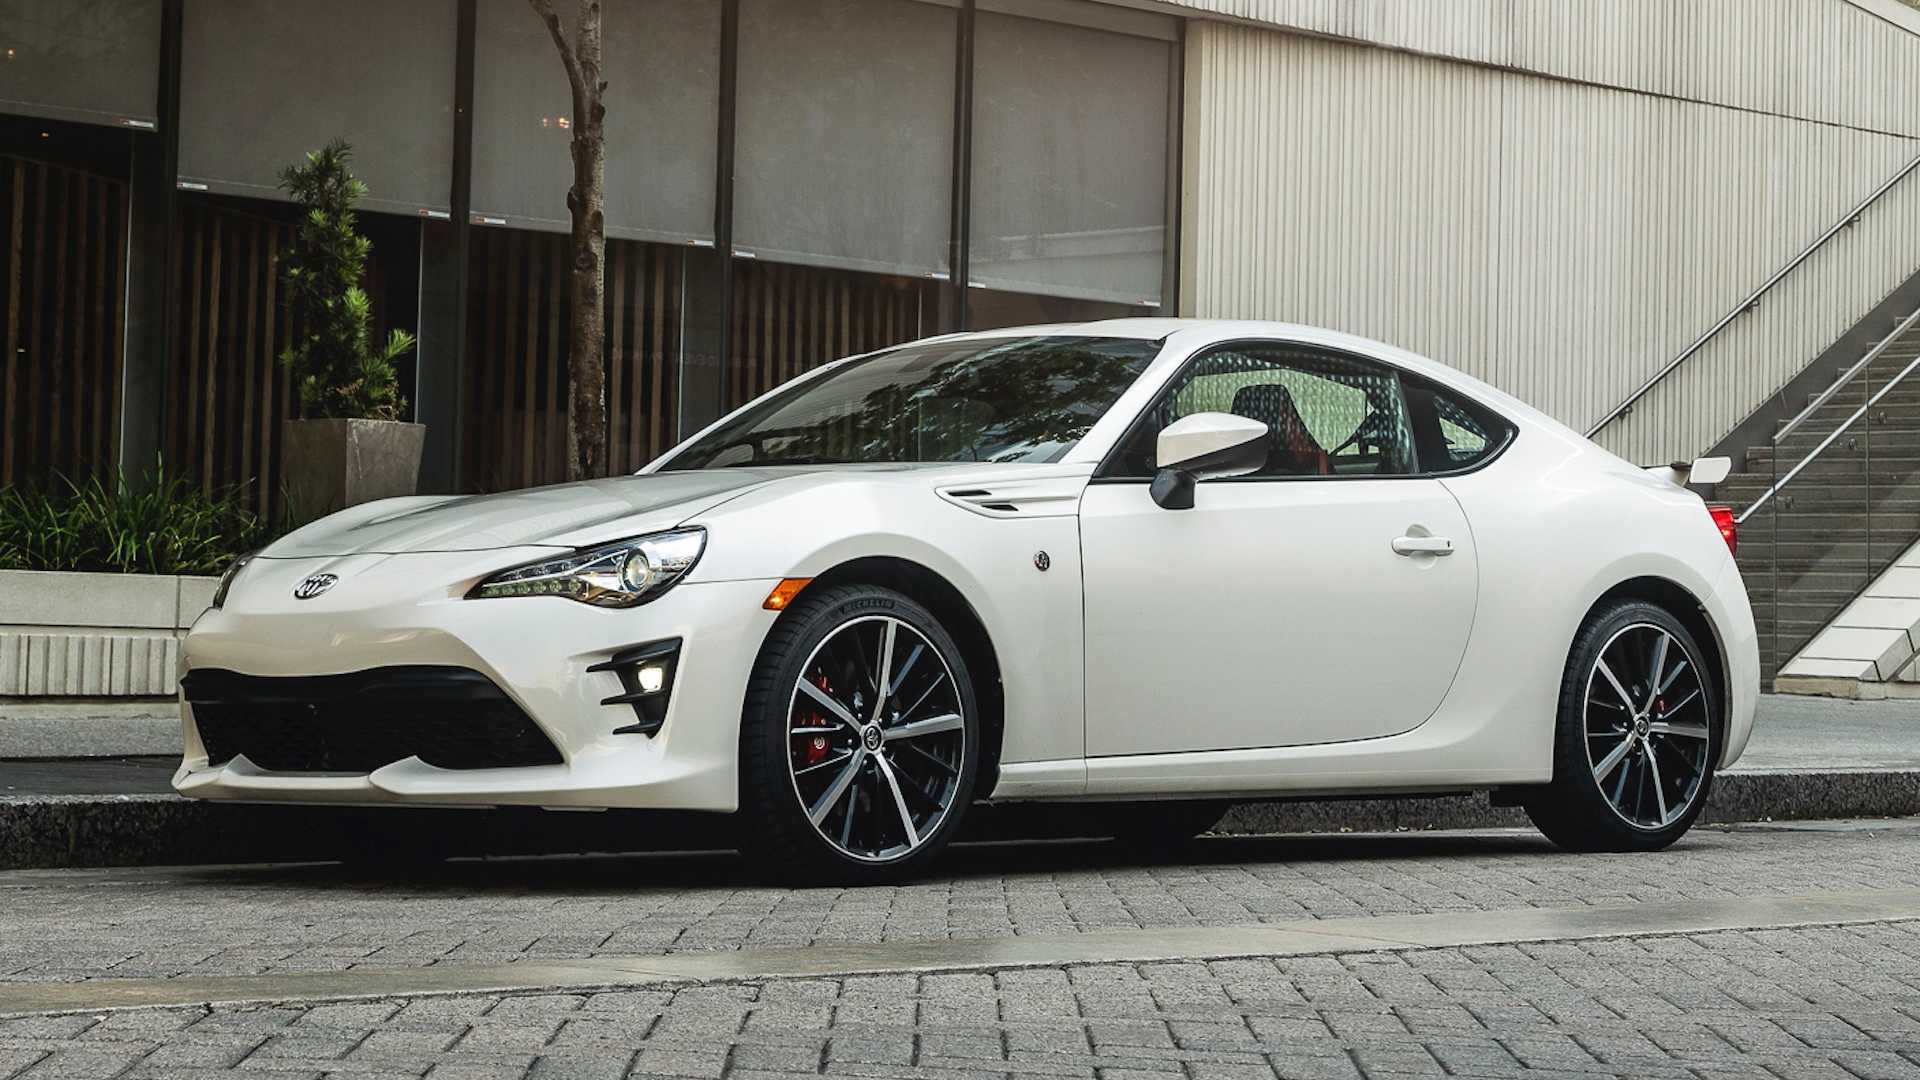 2020 Toyota 86 Gets Grippier With TRD Handling Package, Costs $29,305